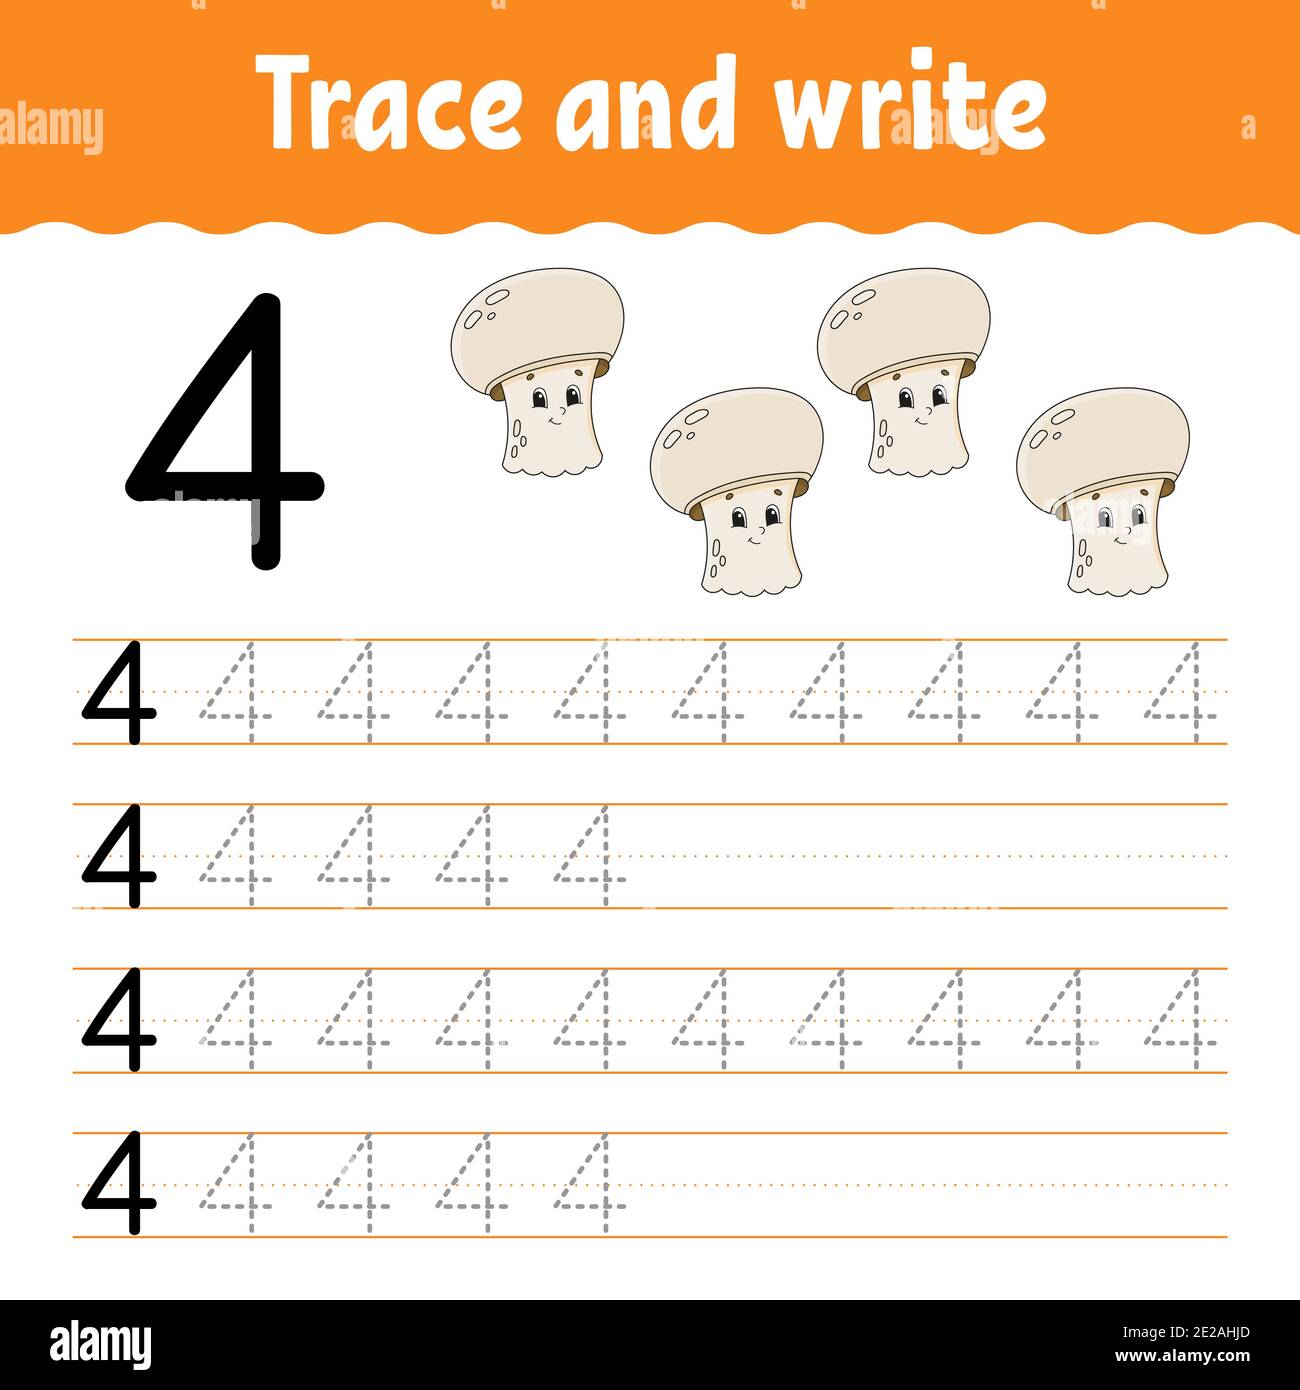 Number trace and write handwriting practice learning numbers for kids education developing worksheet color activity page isolated vector illus stock vector image art